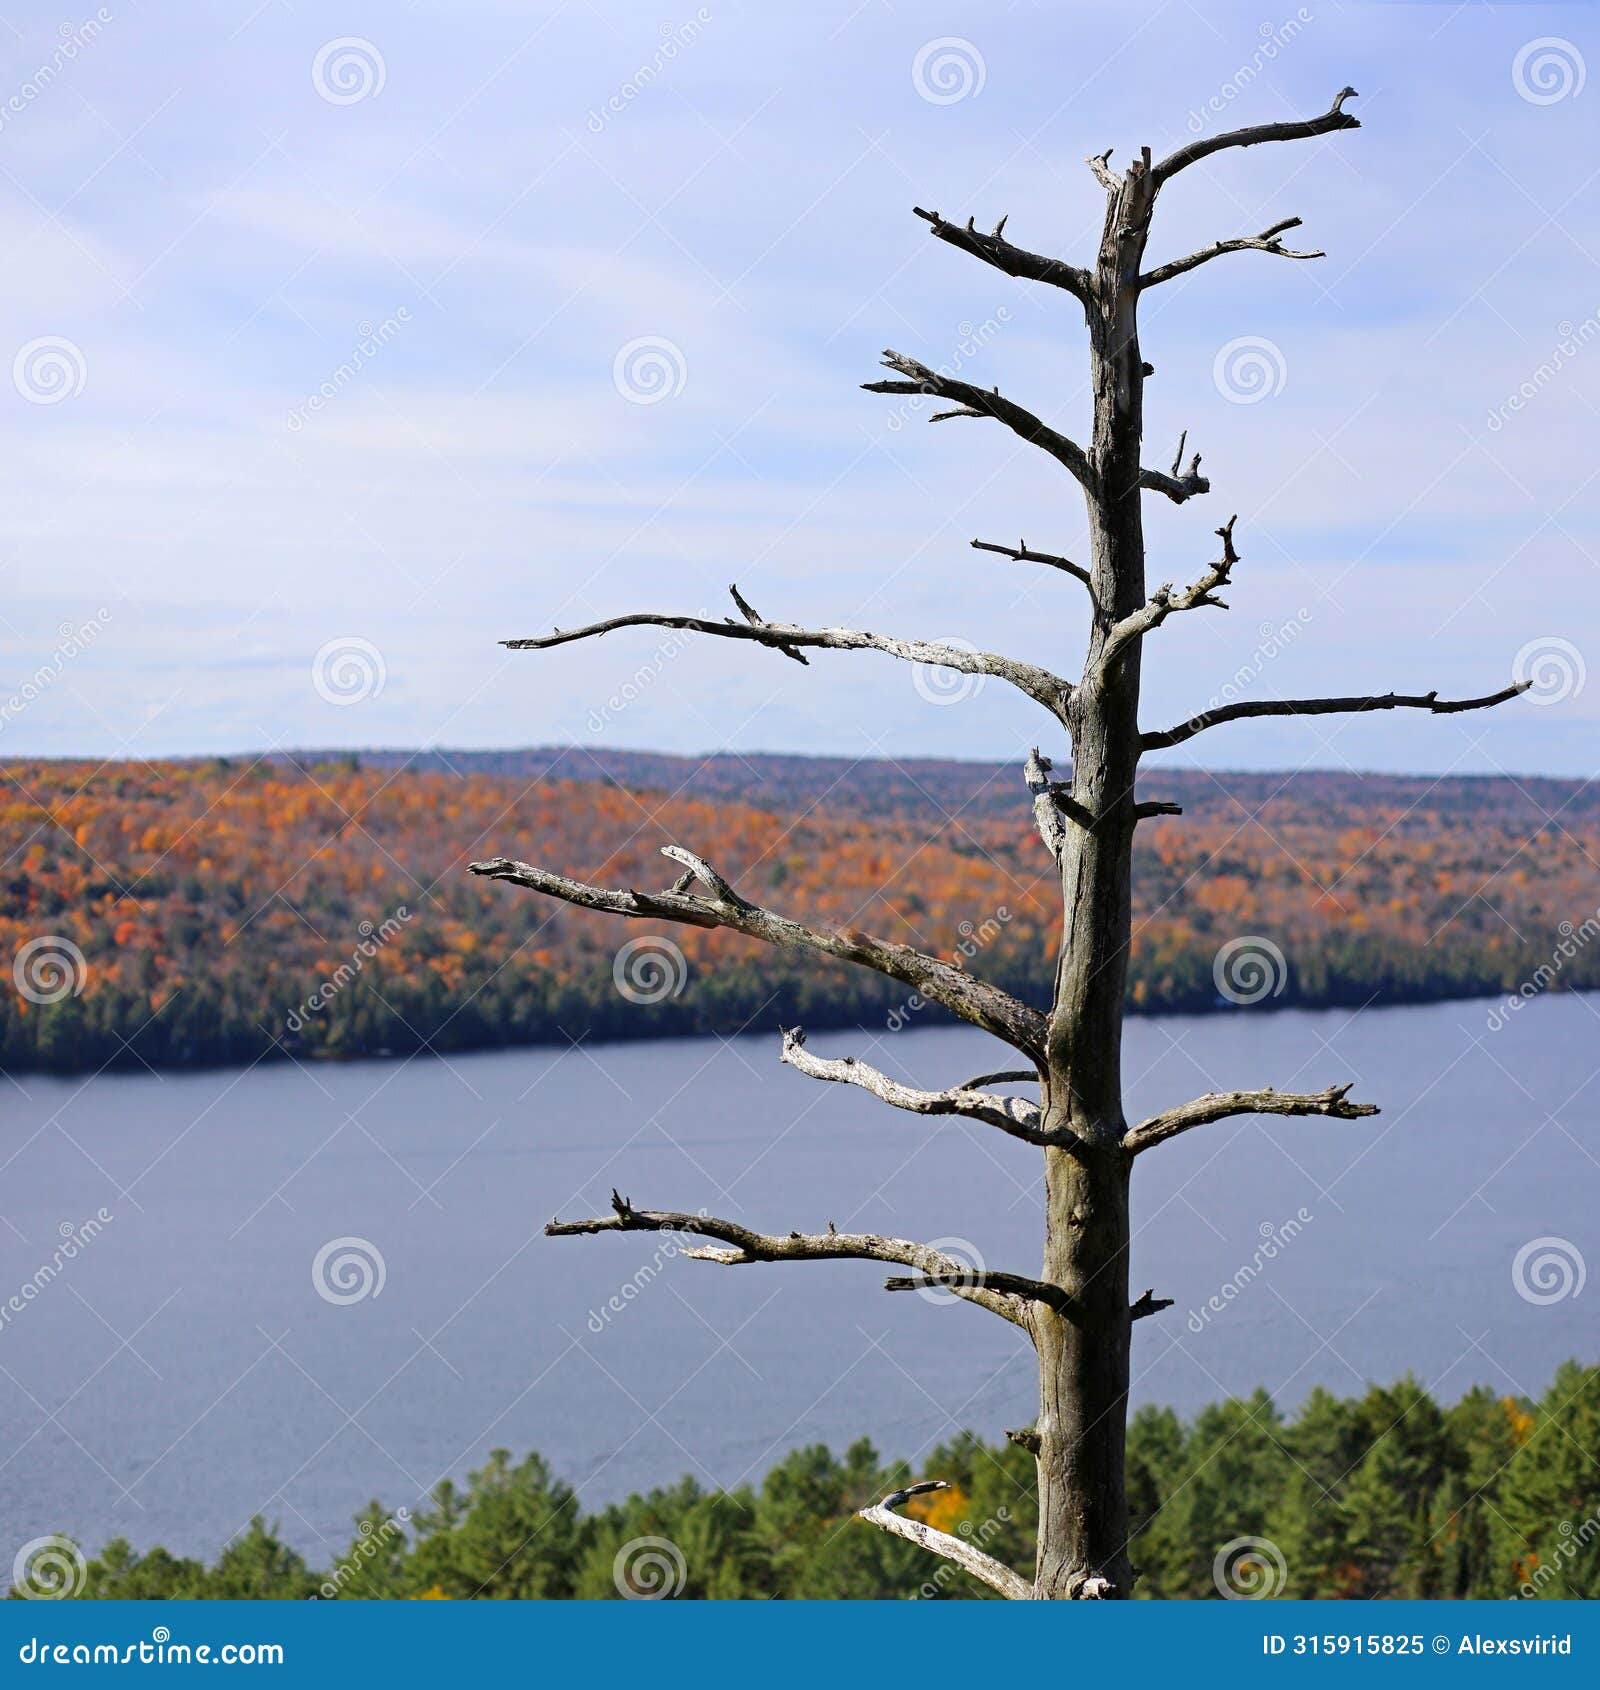 view of rock lake in algonquin park, ontario, canada